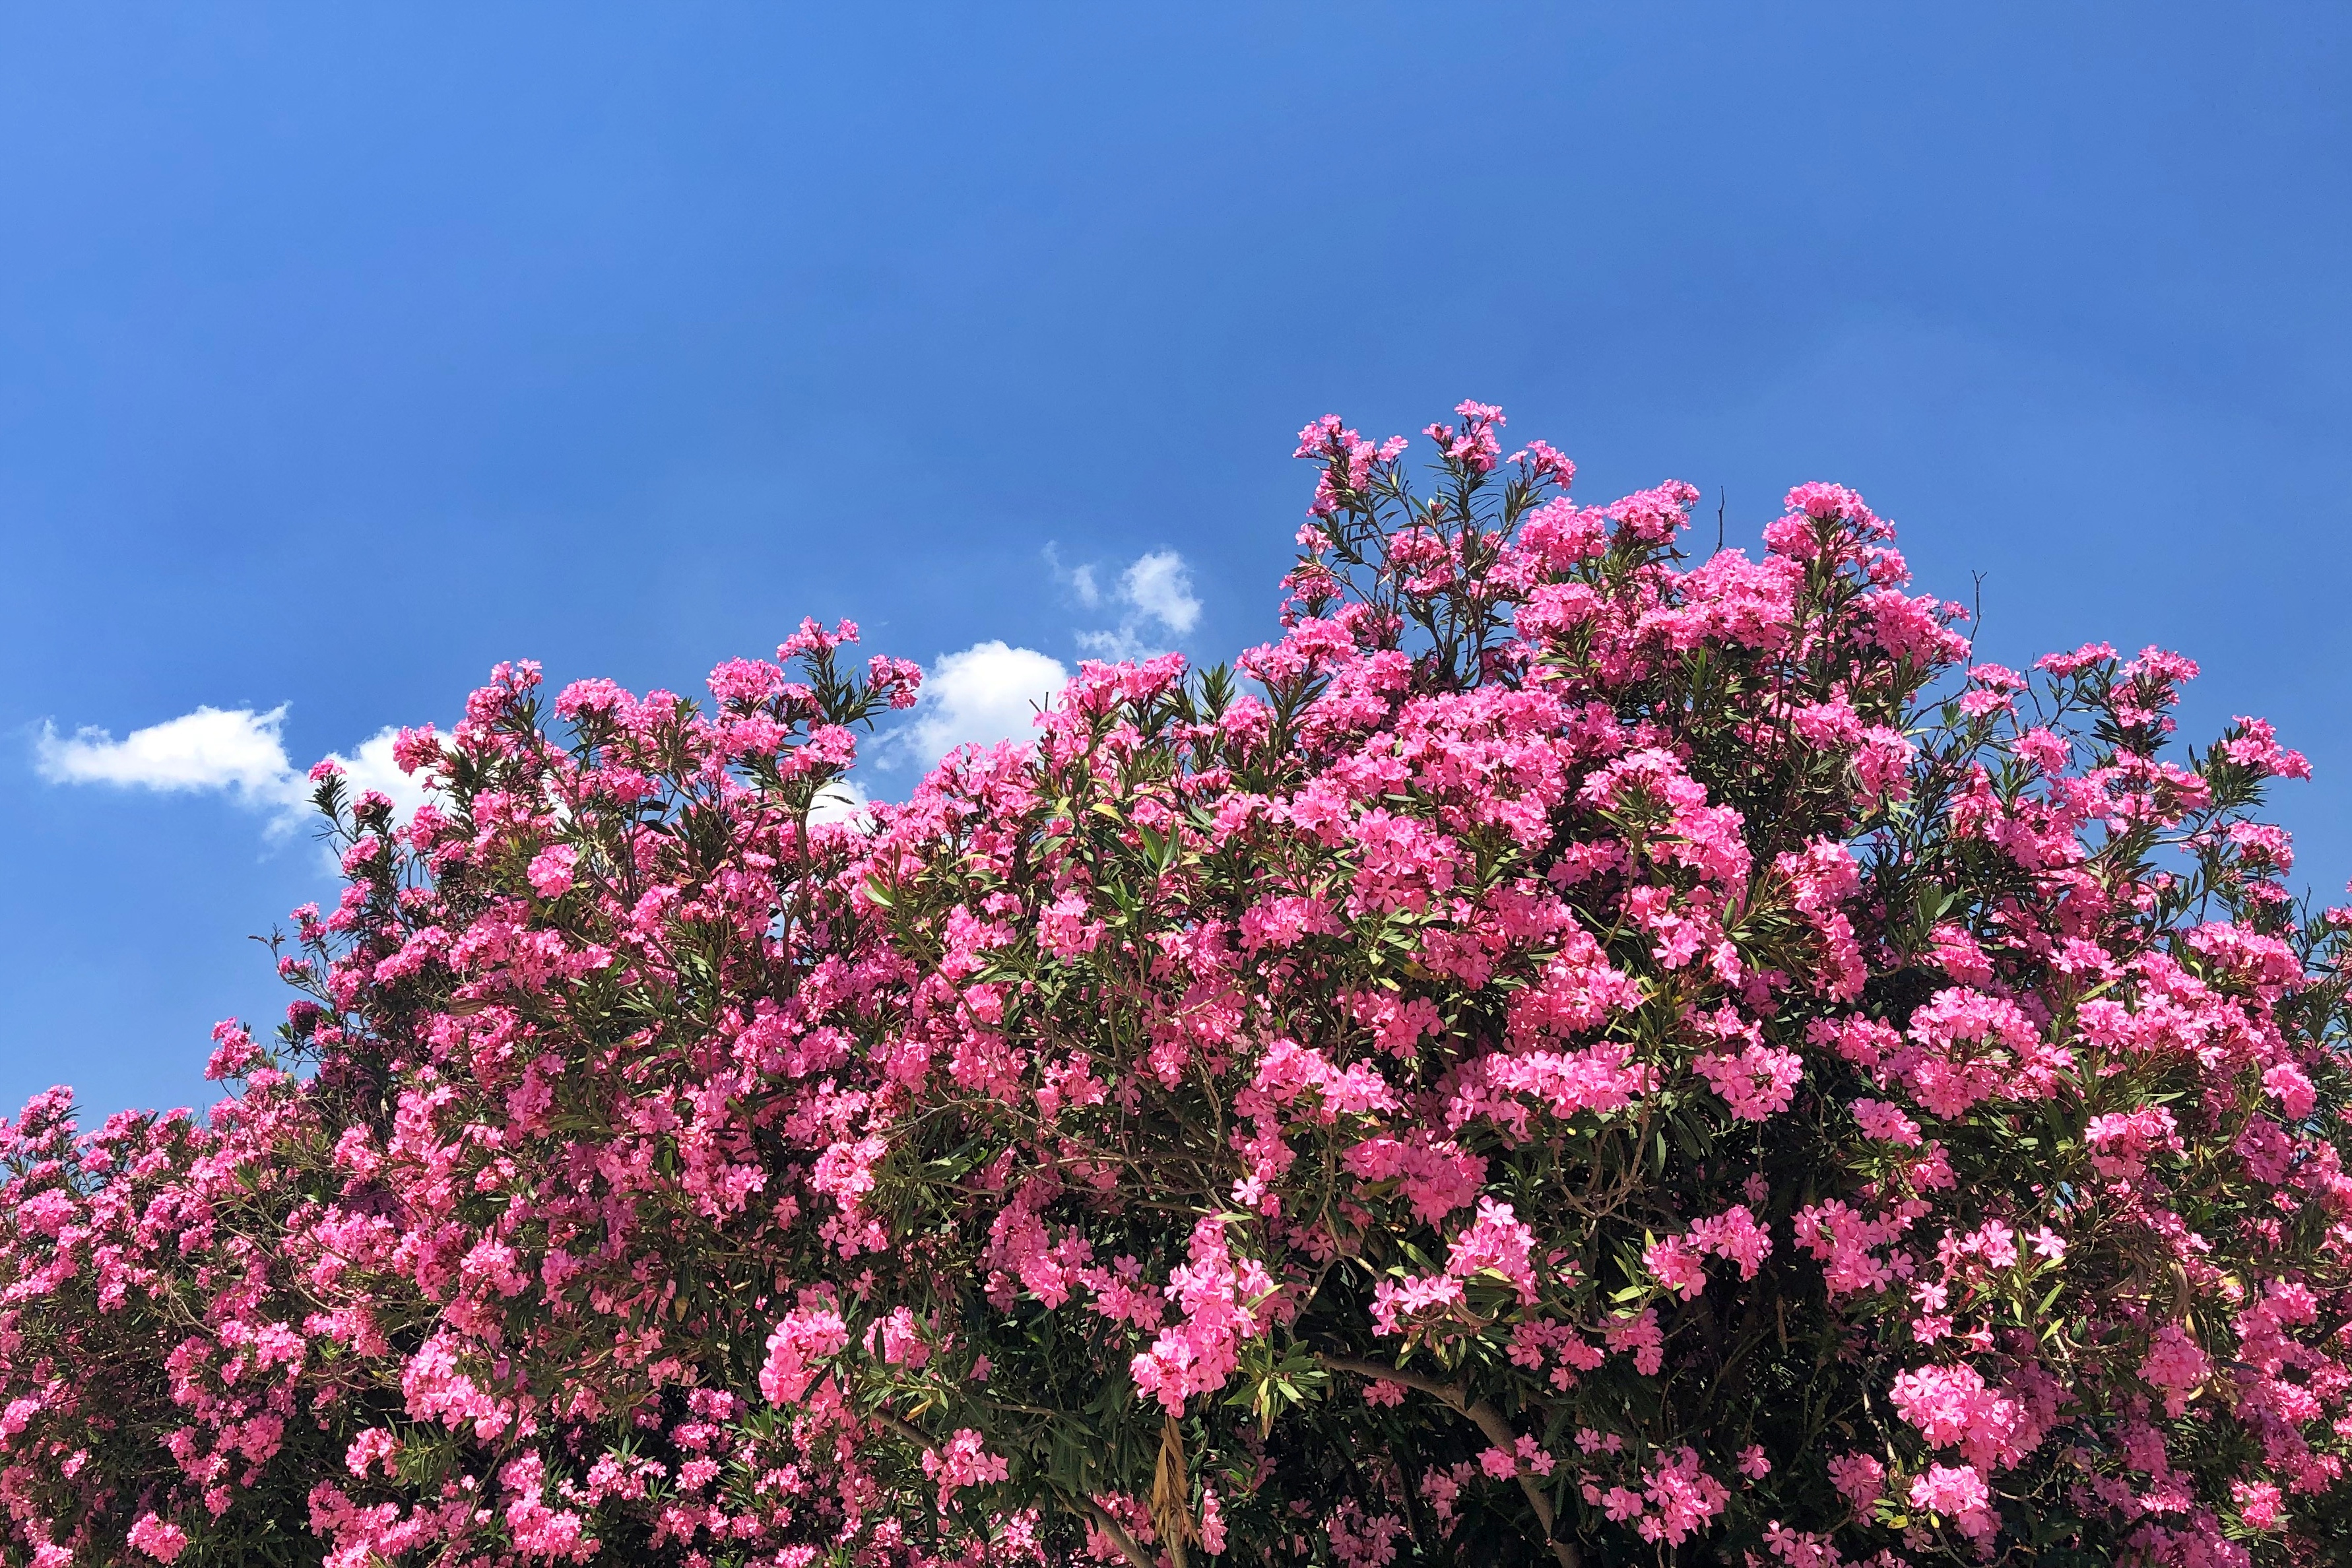 Bush with pink flowers against a blue sky